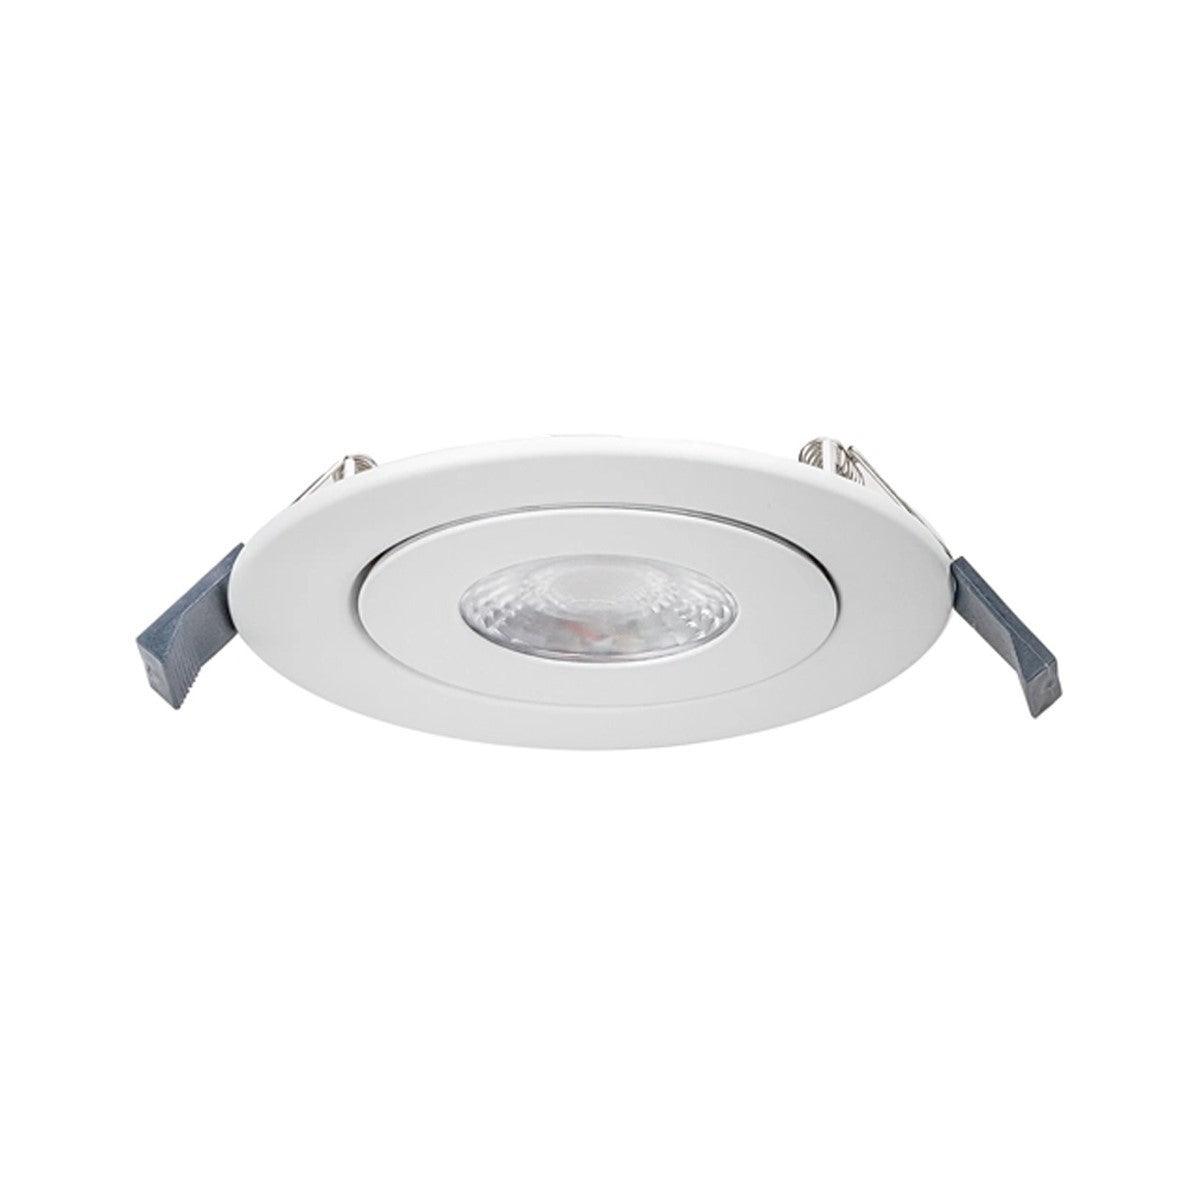 4 In. Lotos LED Adjustable Canless LED Recessed Light, 15 Watt, 800 Lumens, Selectable CCT, 2700K to 5000K, 120/277V